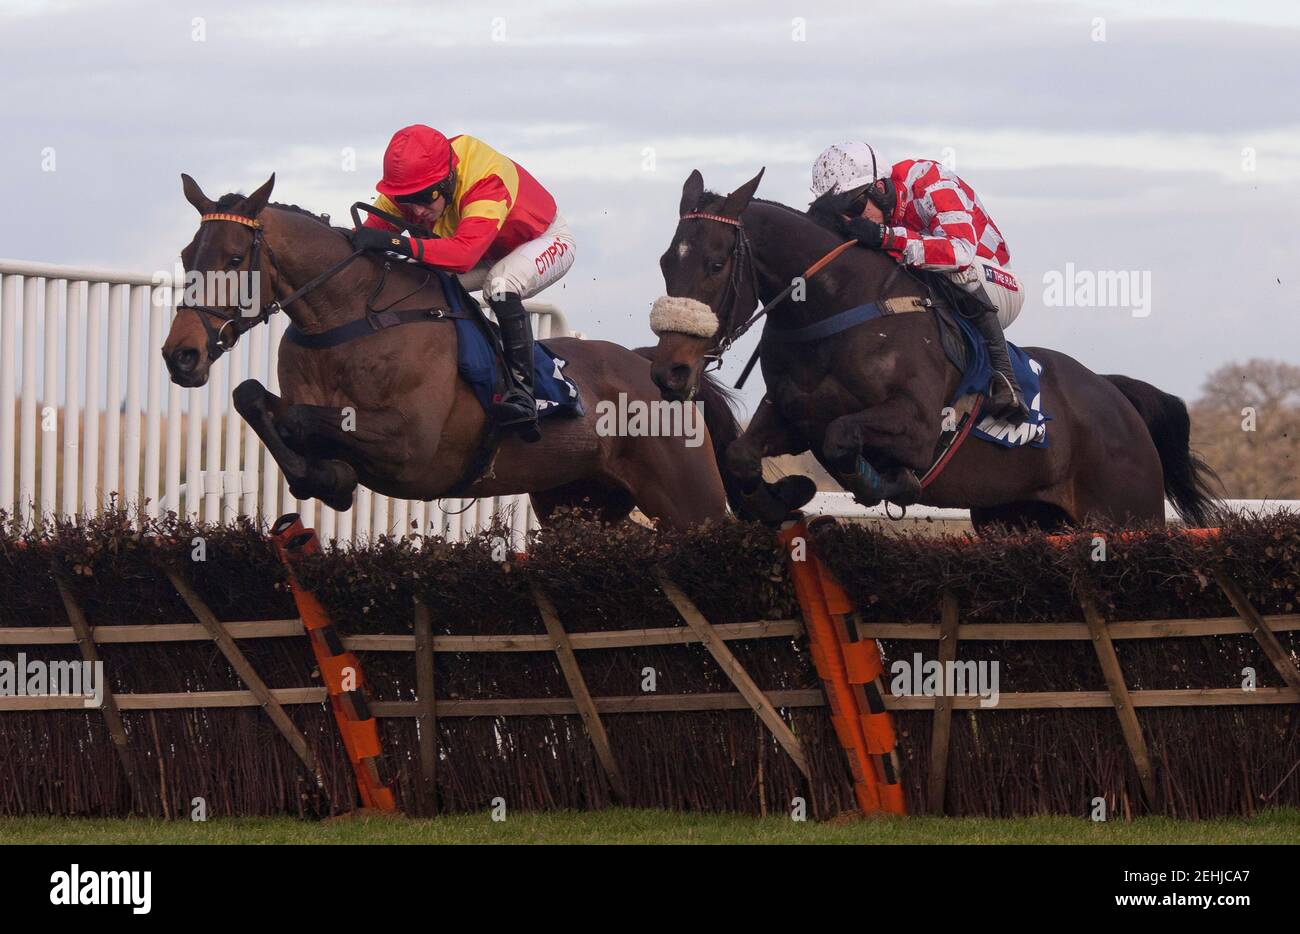 Horse Racing - Ascot - Ascot Racecourse - 21/12/12  Puffin Billy ridden by Barry Geraghty (R) pulls away from the last flight with Up To Something ridden by Noel Fehily before going on to win the 13.55, The Mitie Kennel Gate Novices' Hurdle  Mandatory Credit: Action Images / Julian Herbert  Livepic Stock Photo